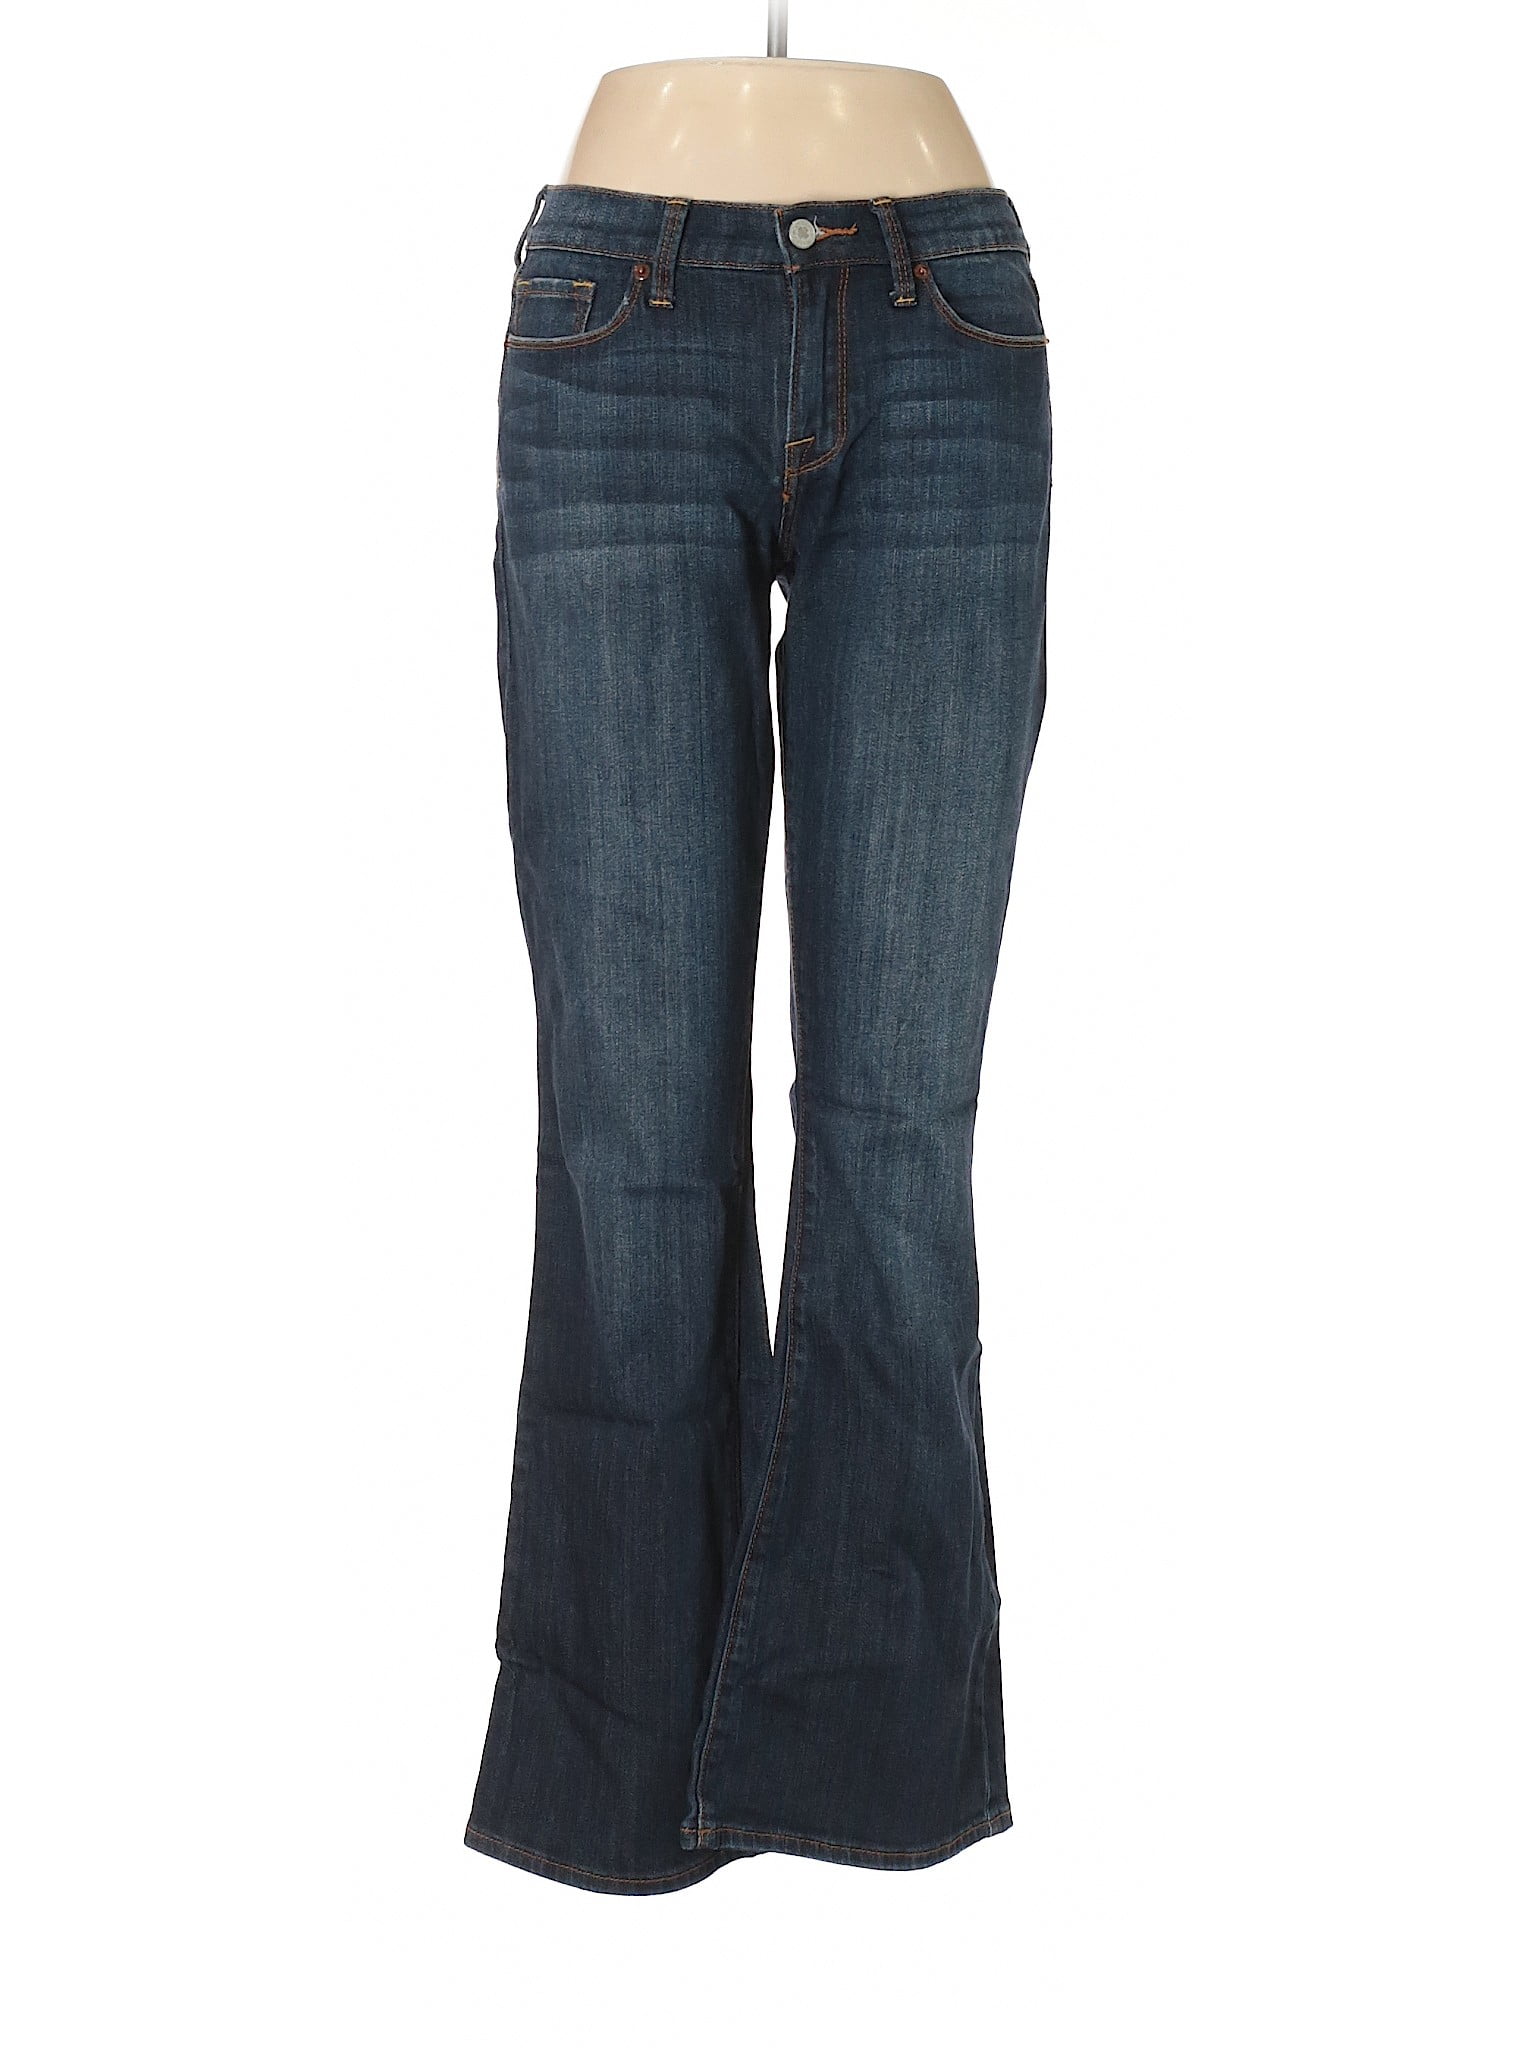 Lucky Brand - Pre-Owned Lucky Brand Women's Size 6 Jeans - Walmart.com ...